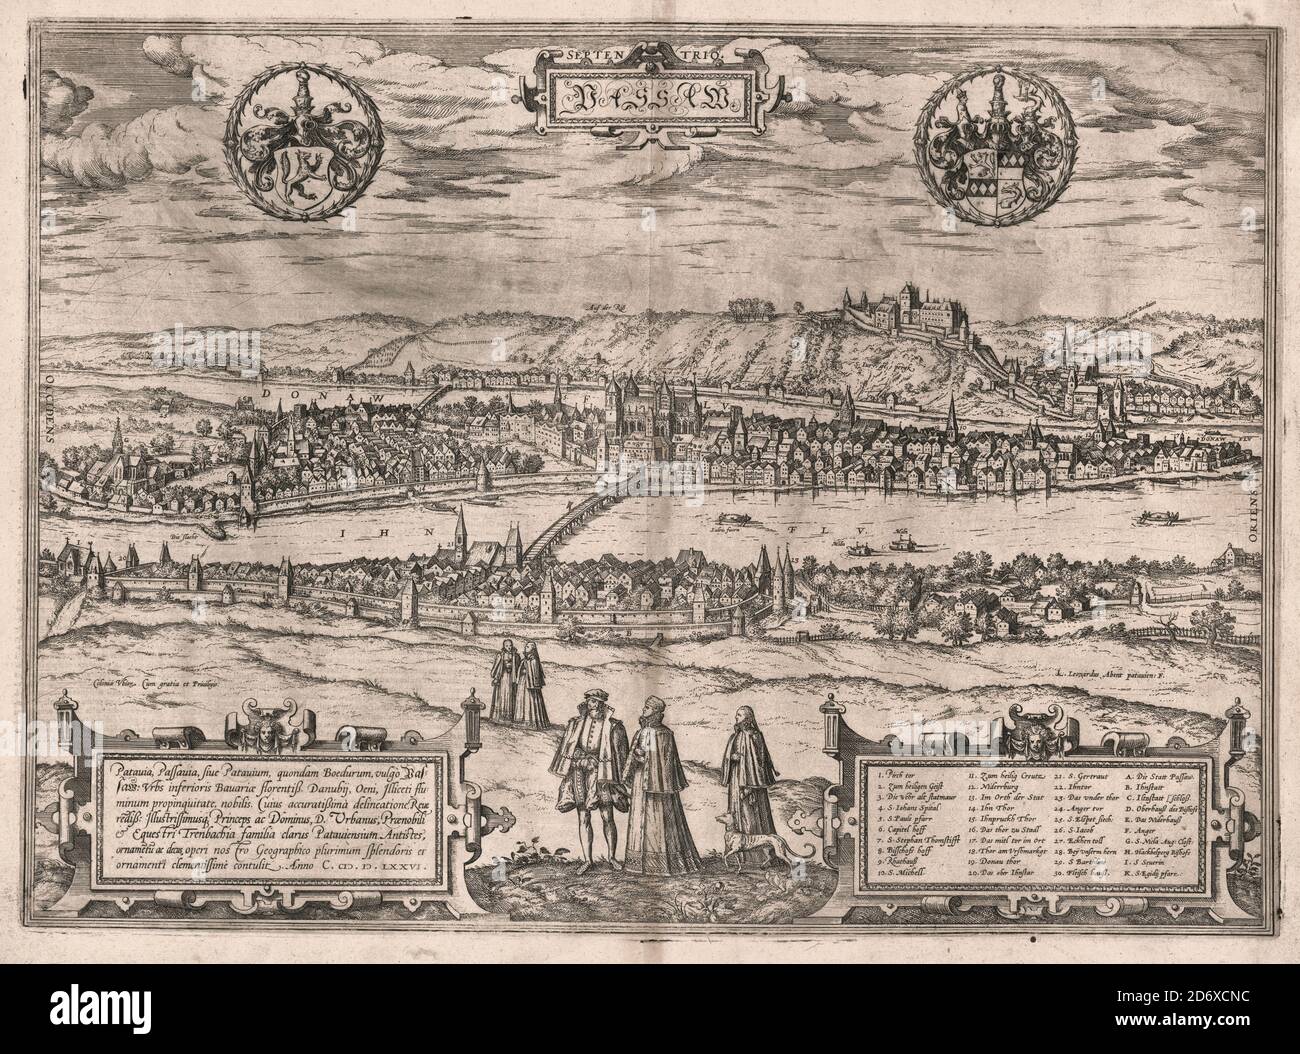 Print shows a bird's-eye view of Passau from the south with the Inn River in the foreground and the Danube River in the background; also shows a man and a woman walking at bottom center with another woman and a dog behind, and two women nearby, city walls along the southern bank of the Inn River, which is spanned at center by a long wooden bridge. Includes two circular heraldic devices at top left and top right. On the lower right corner is a key that correspondes to numbered and lettered features on the print. Stock Photo